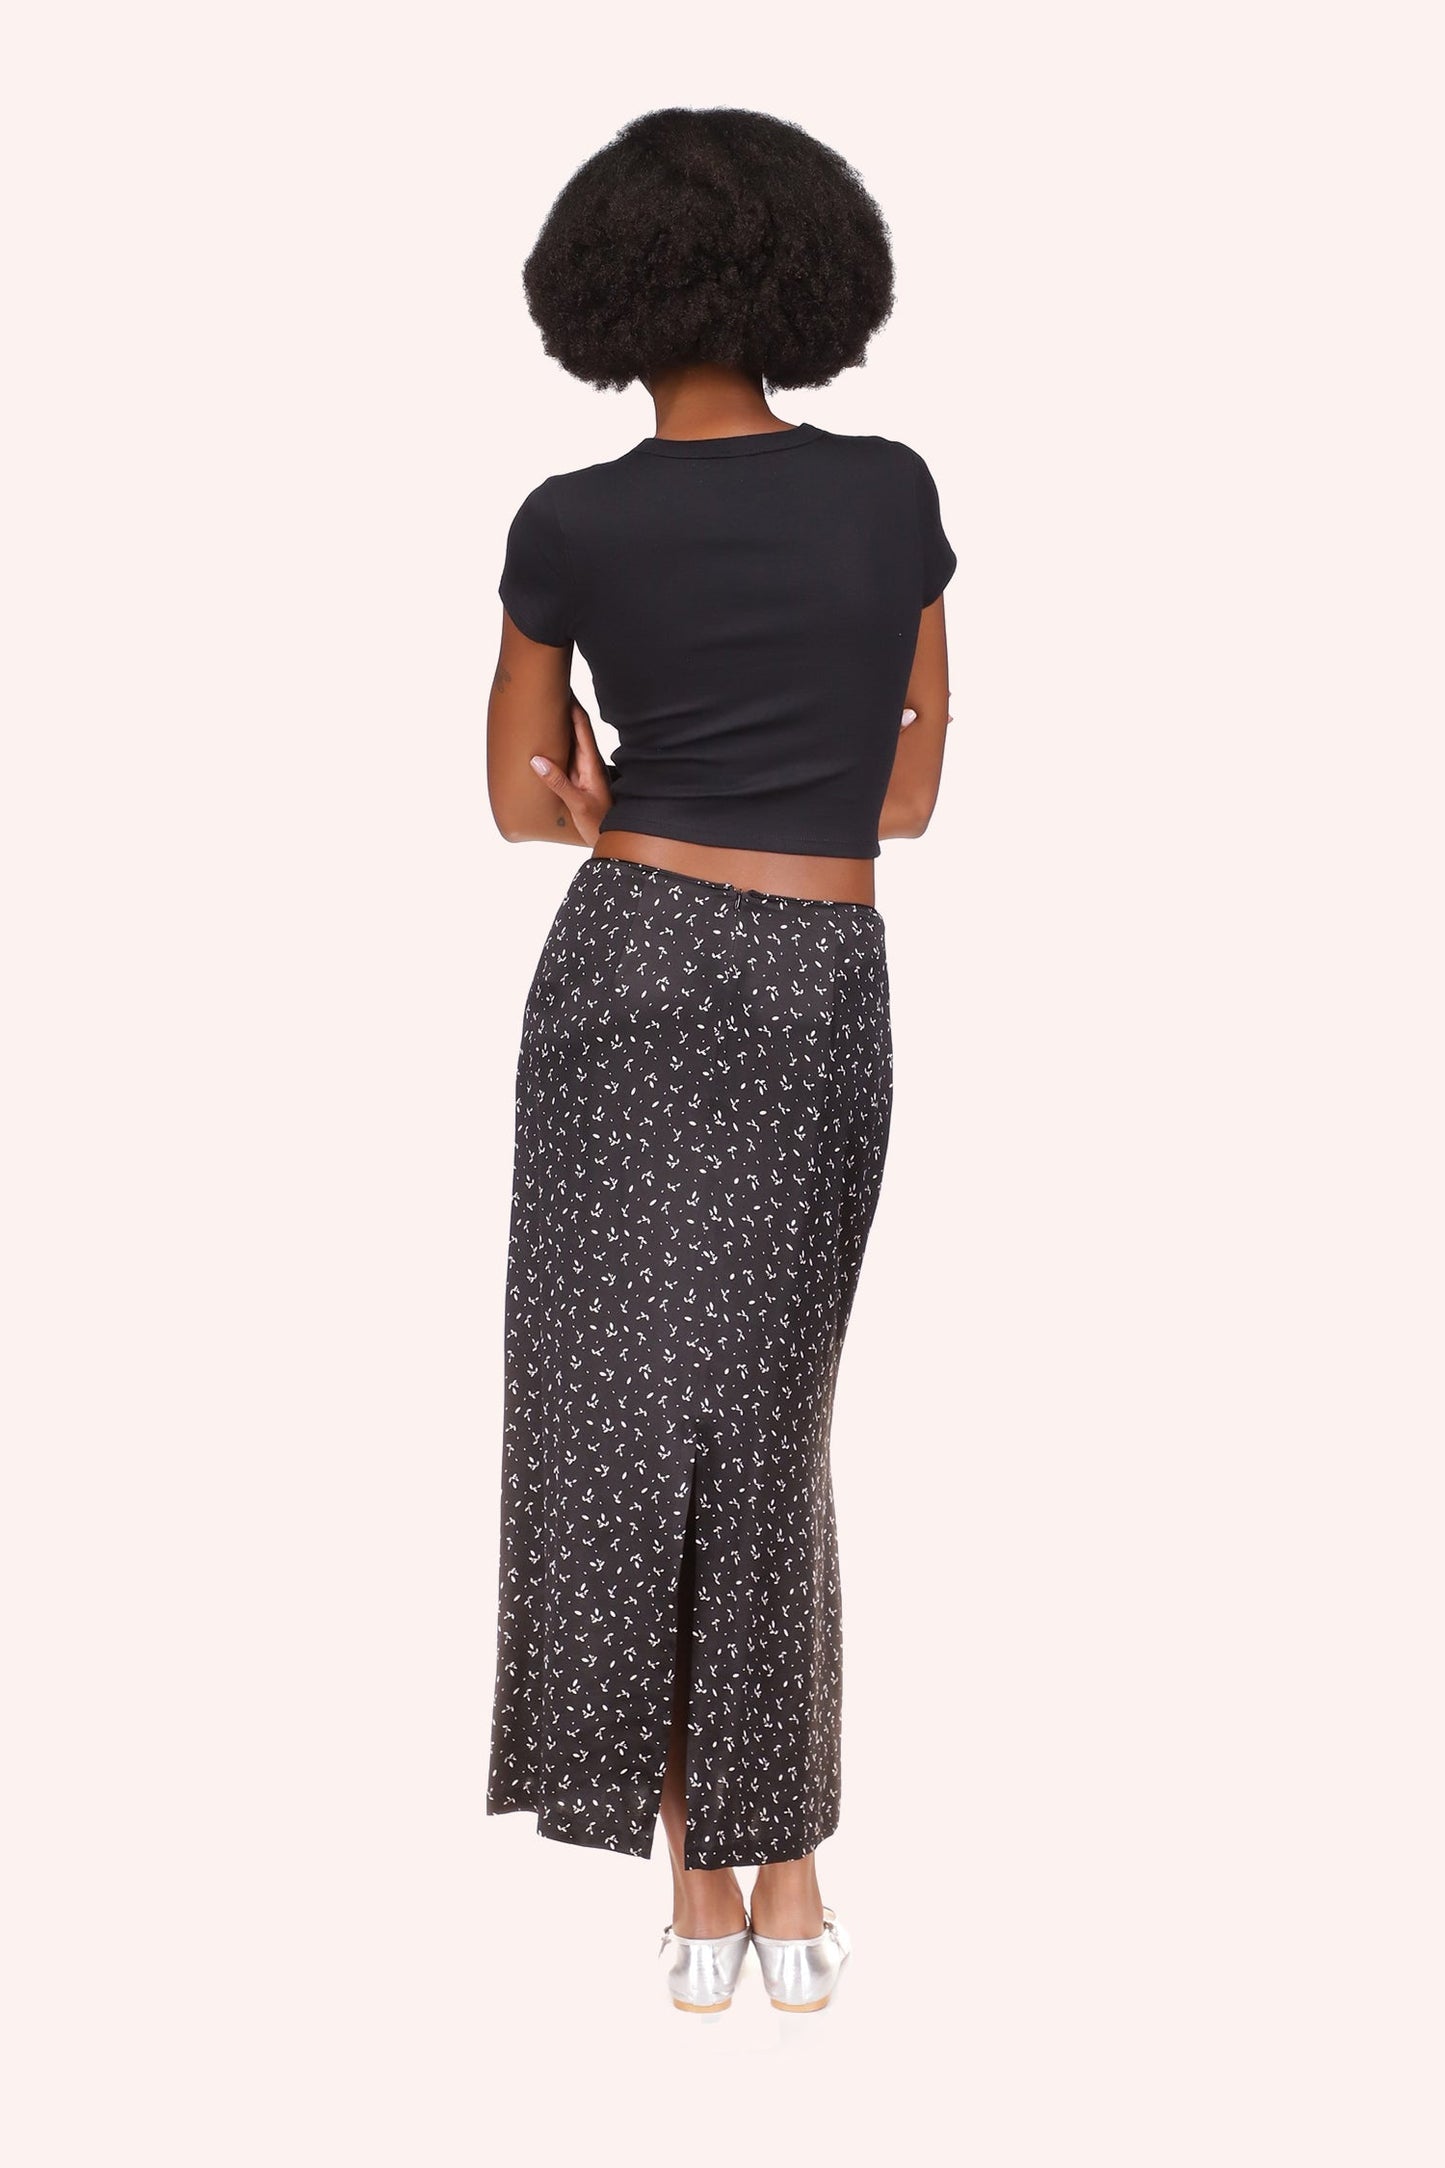 Black tee, Short-sleeved, above-the-hips tee that leave a gap between the shirt and a skirt or jeans